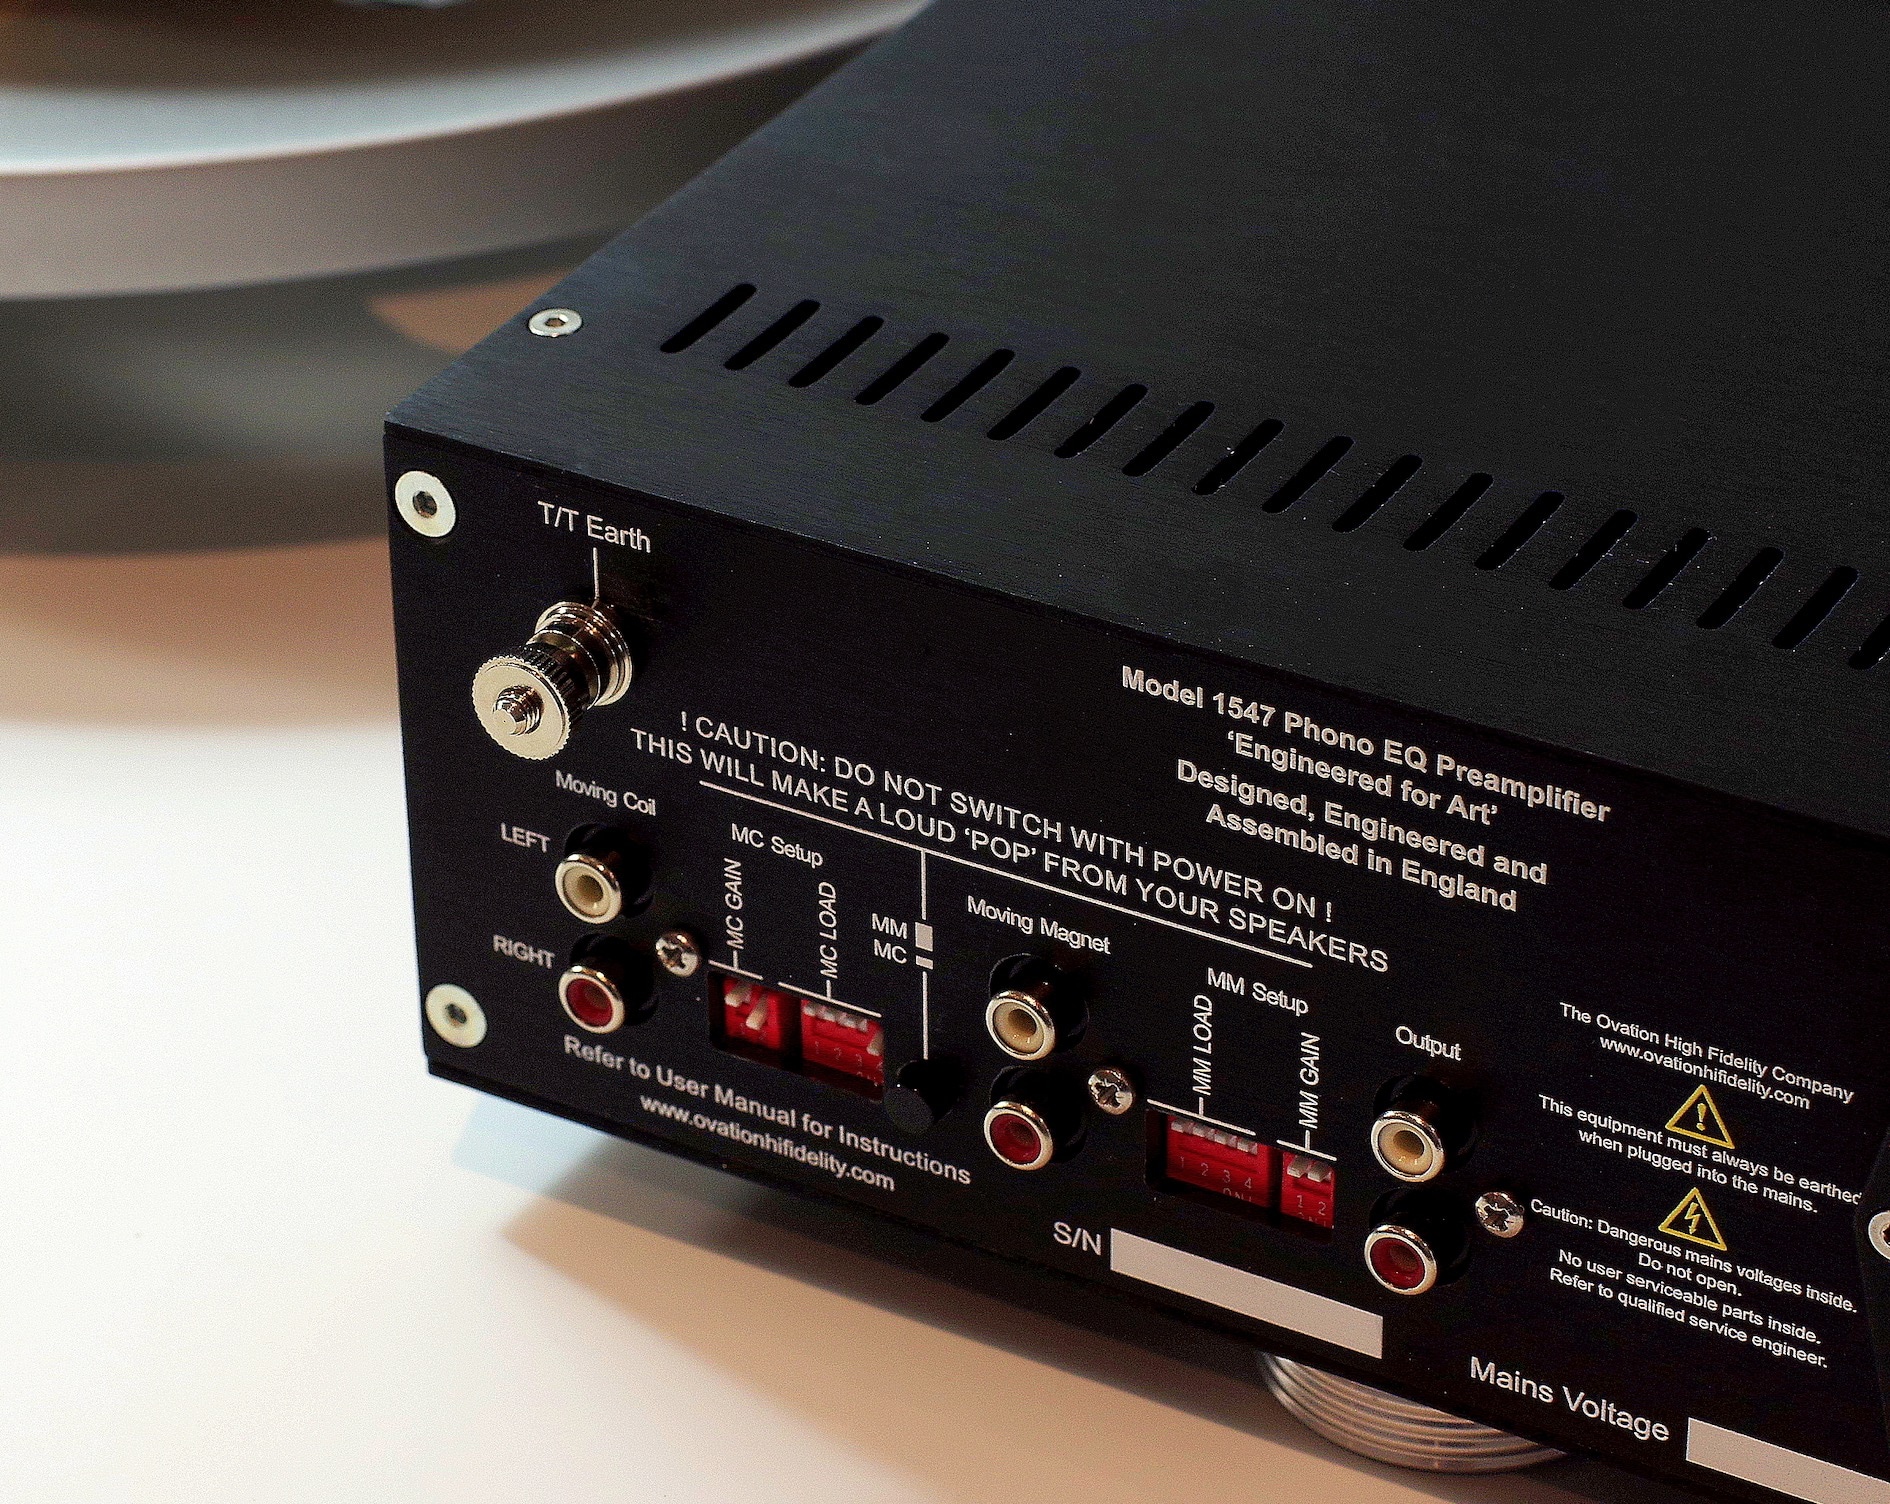 1547 Phono Amp From Ovation High Fidelity